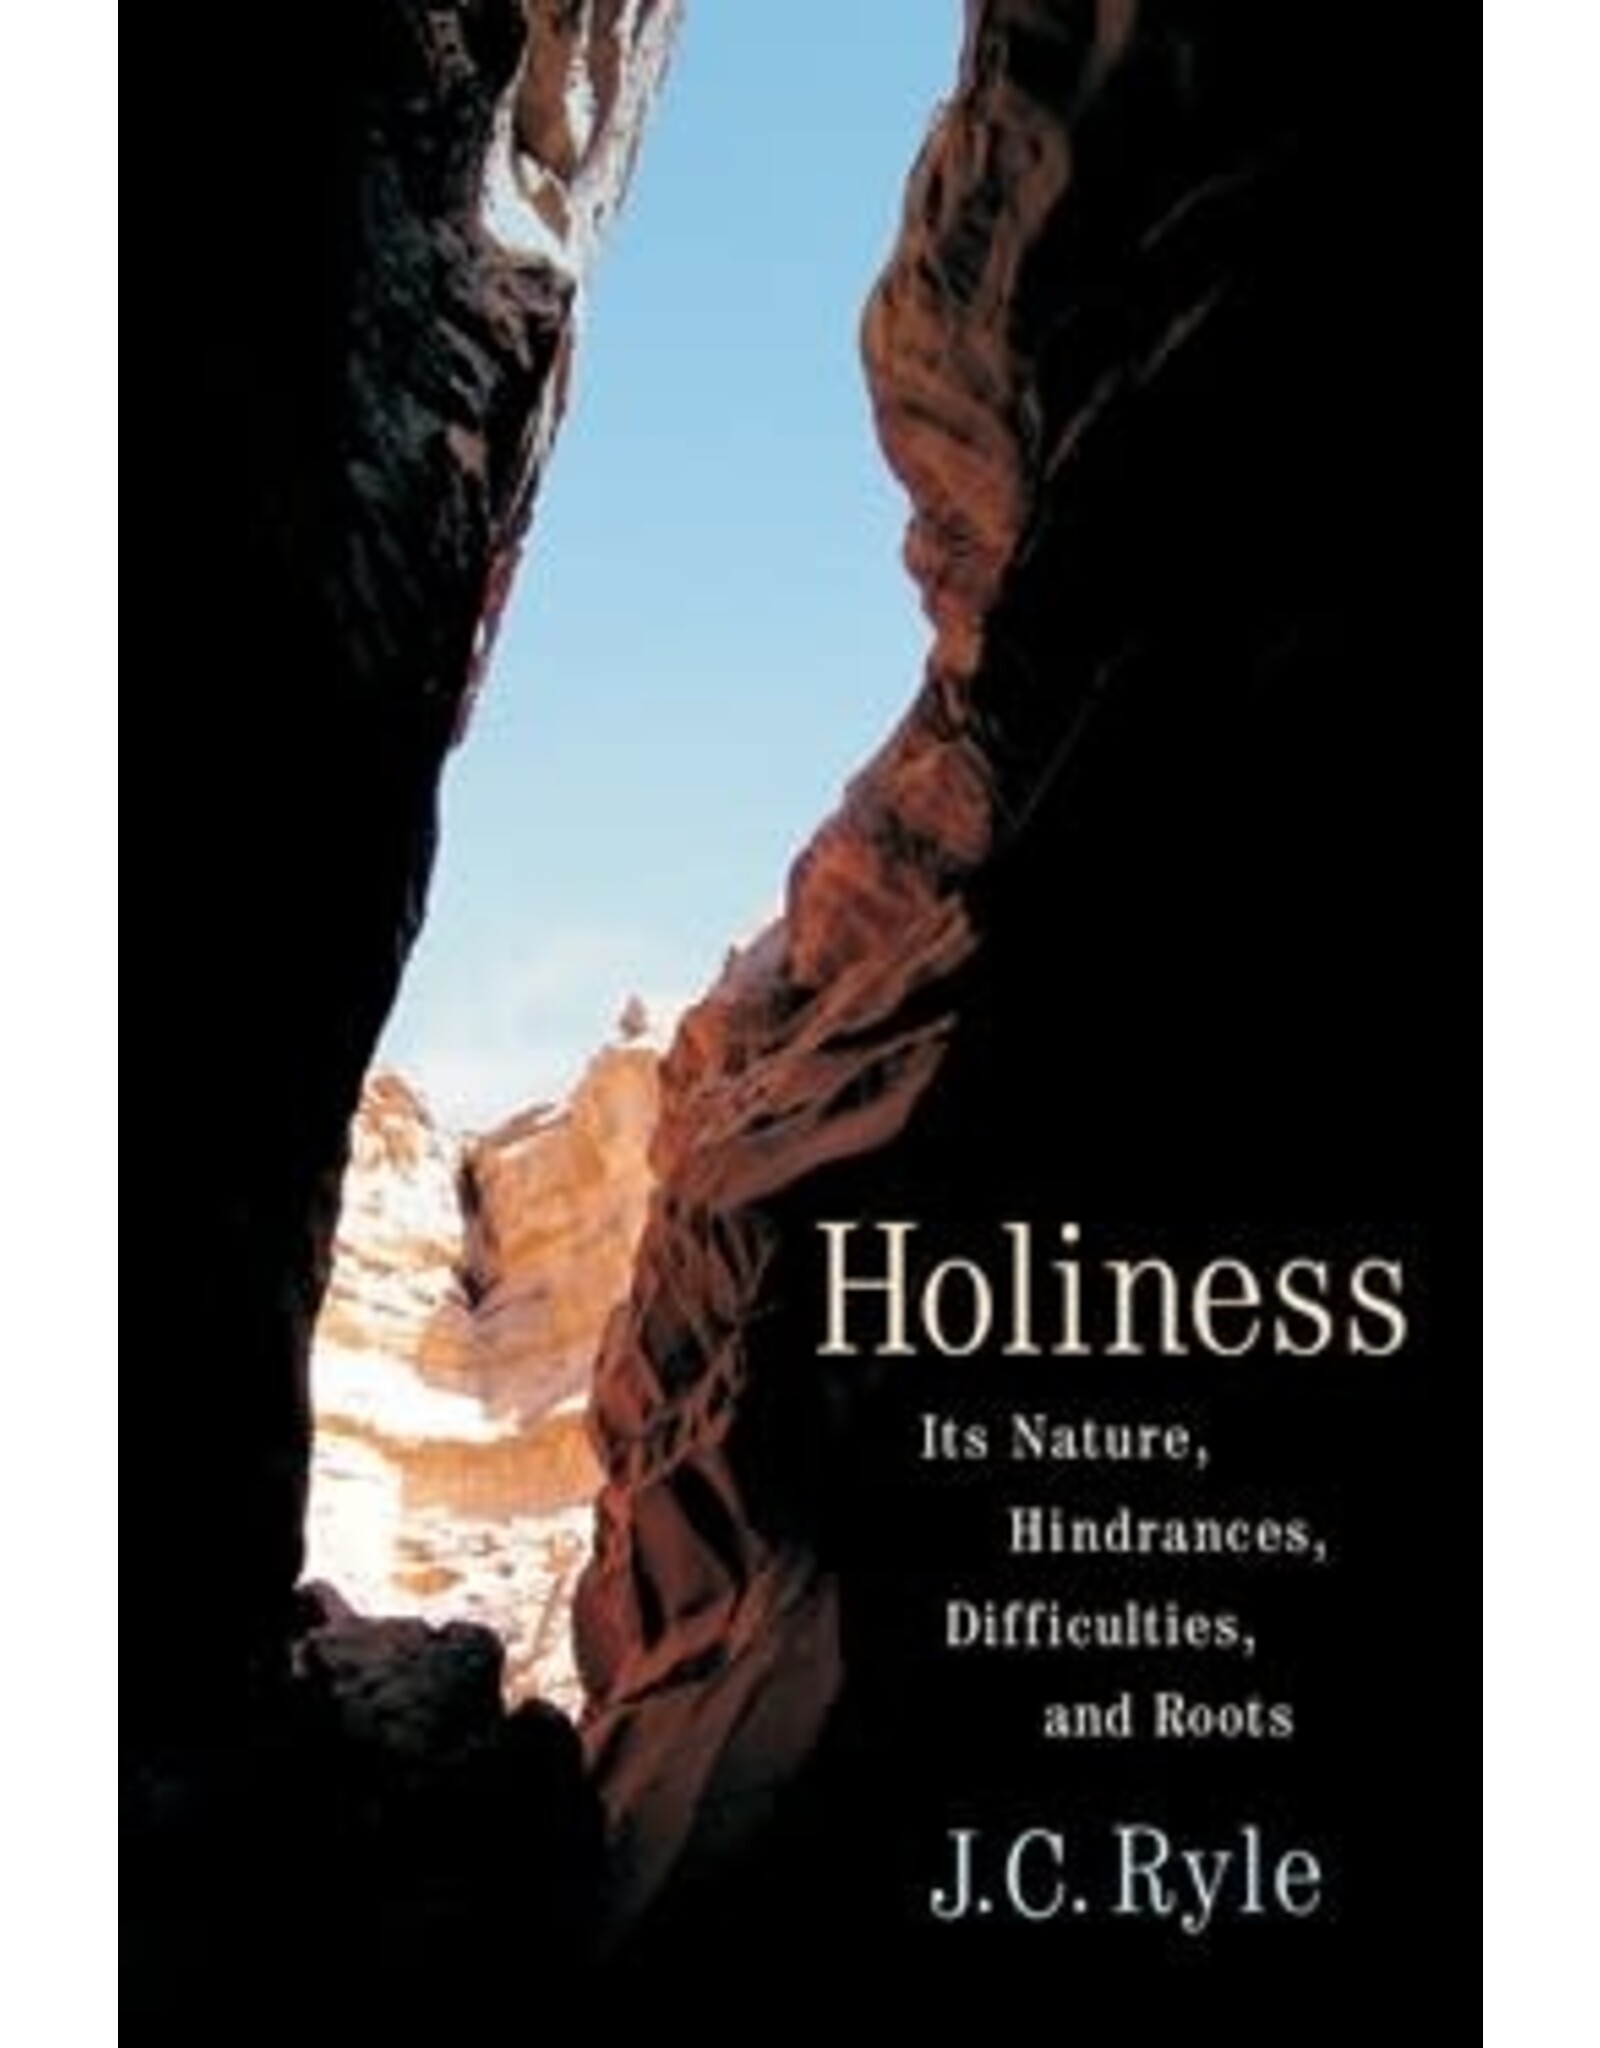 J. C. Ryle Holiness  - Its Nature, Hindrances, Difficulties and Roots